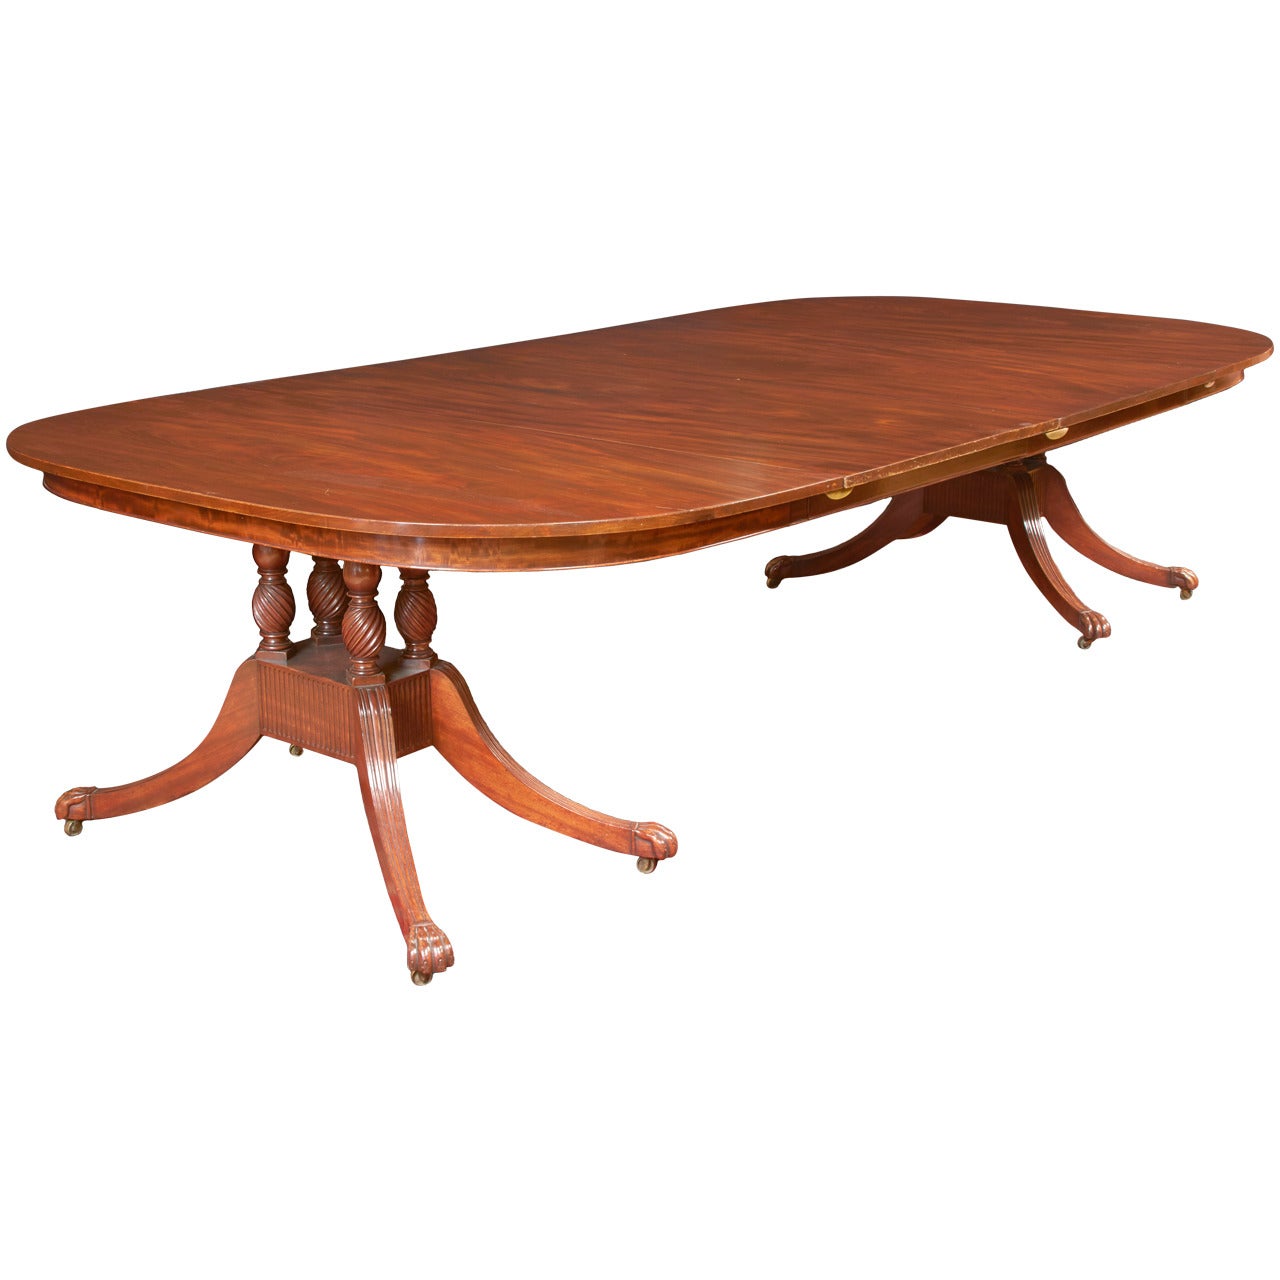 American Classical Style Mahogany Two Pedestal Dining Table with Three Leaves